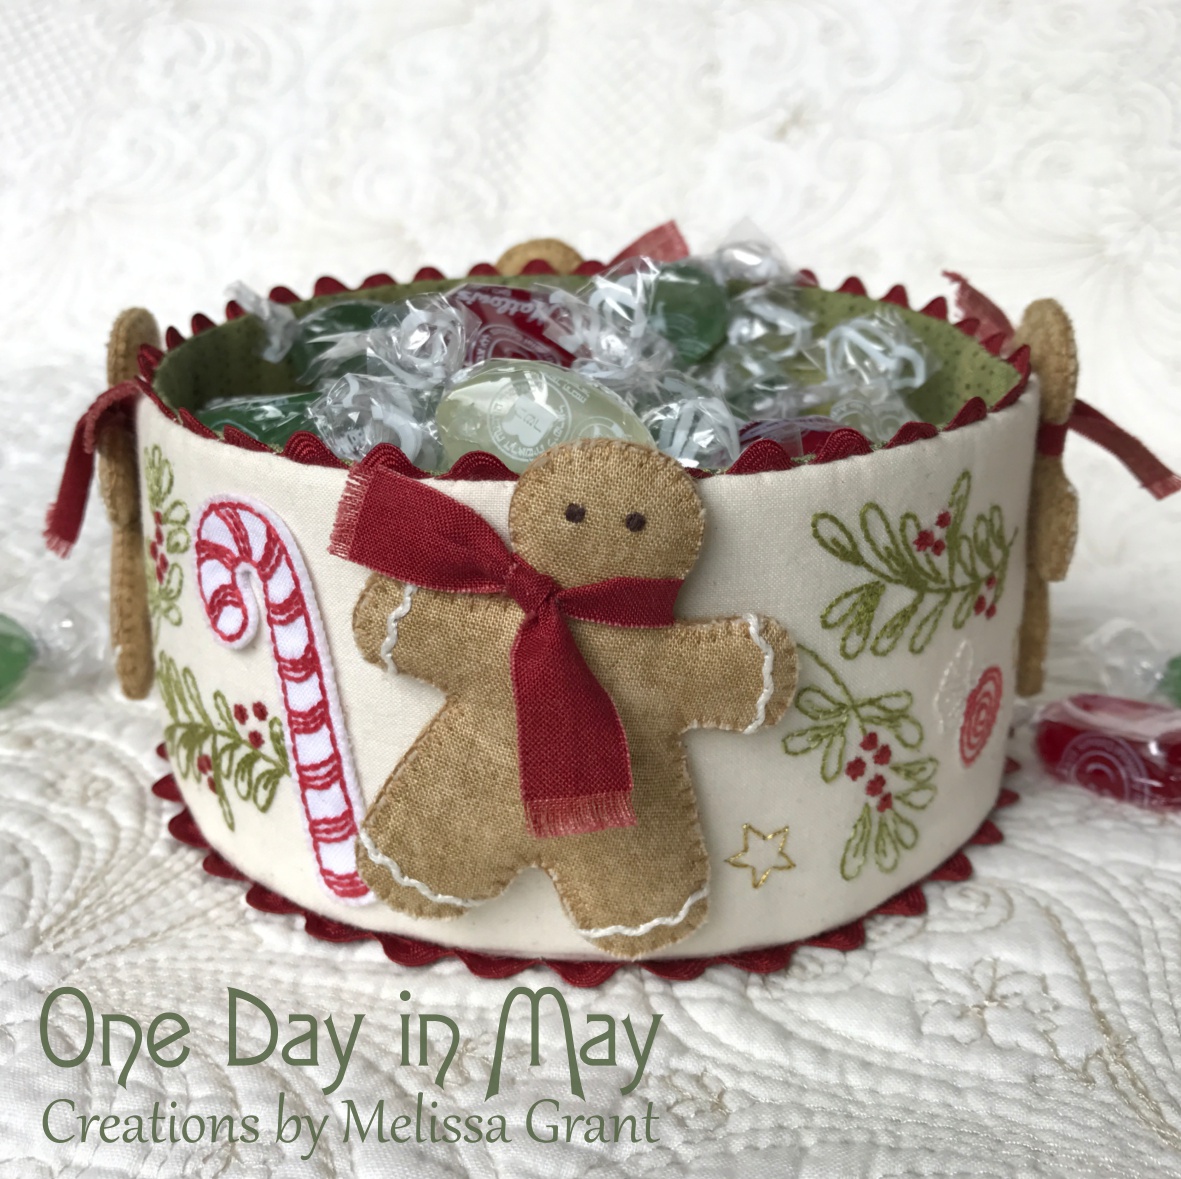 Sweet Treats - Christmas fabric bowl with dimensional gingerbread men